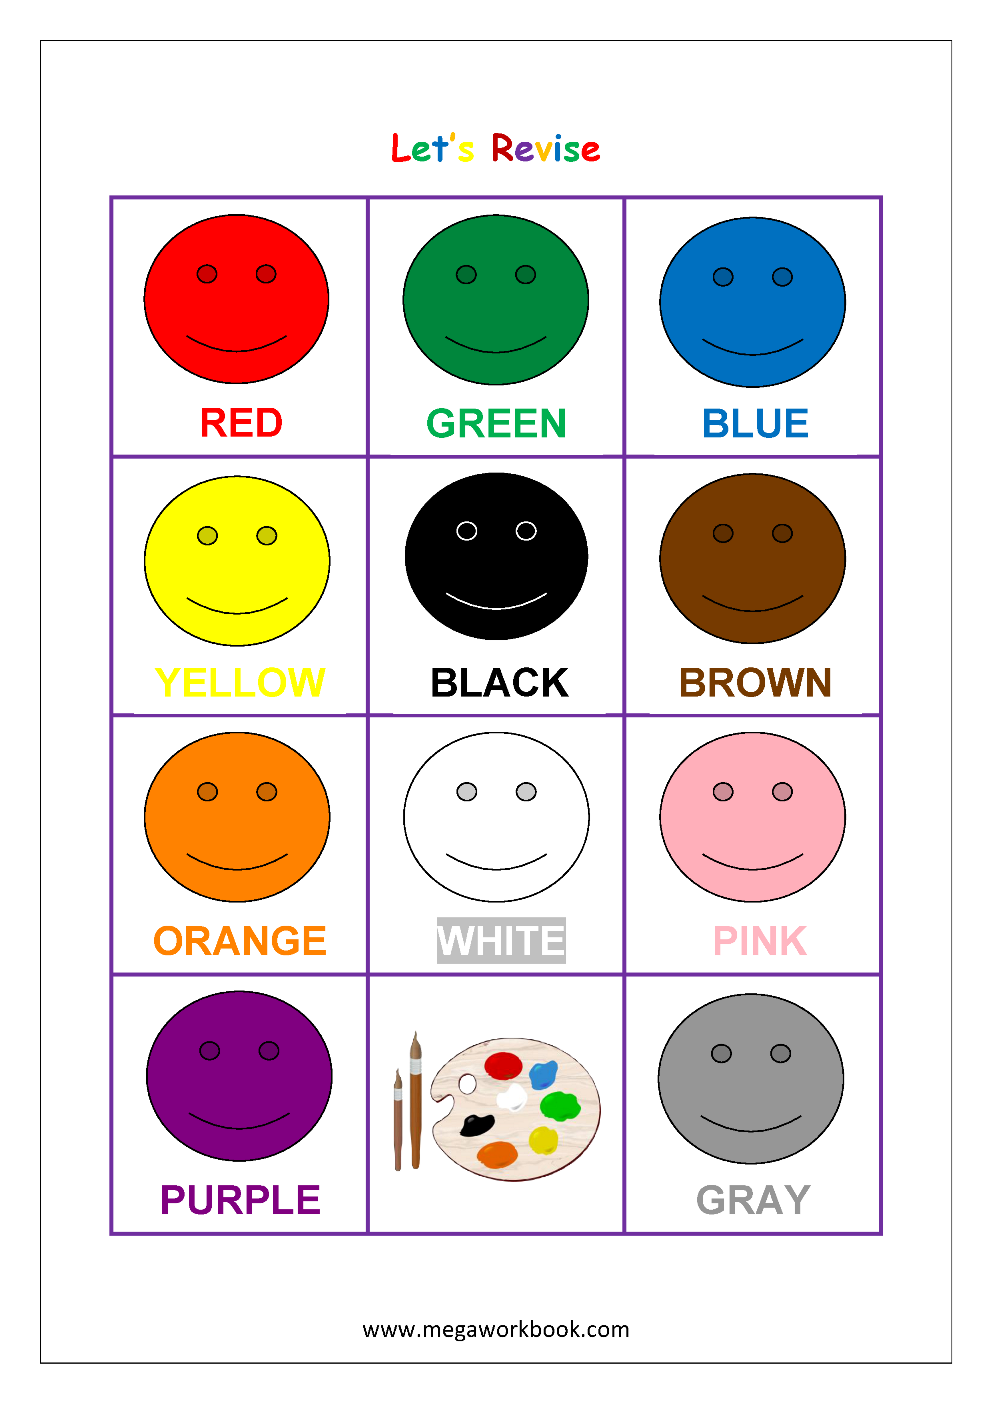 Colors for Kids: Teaching Colors to Children